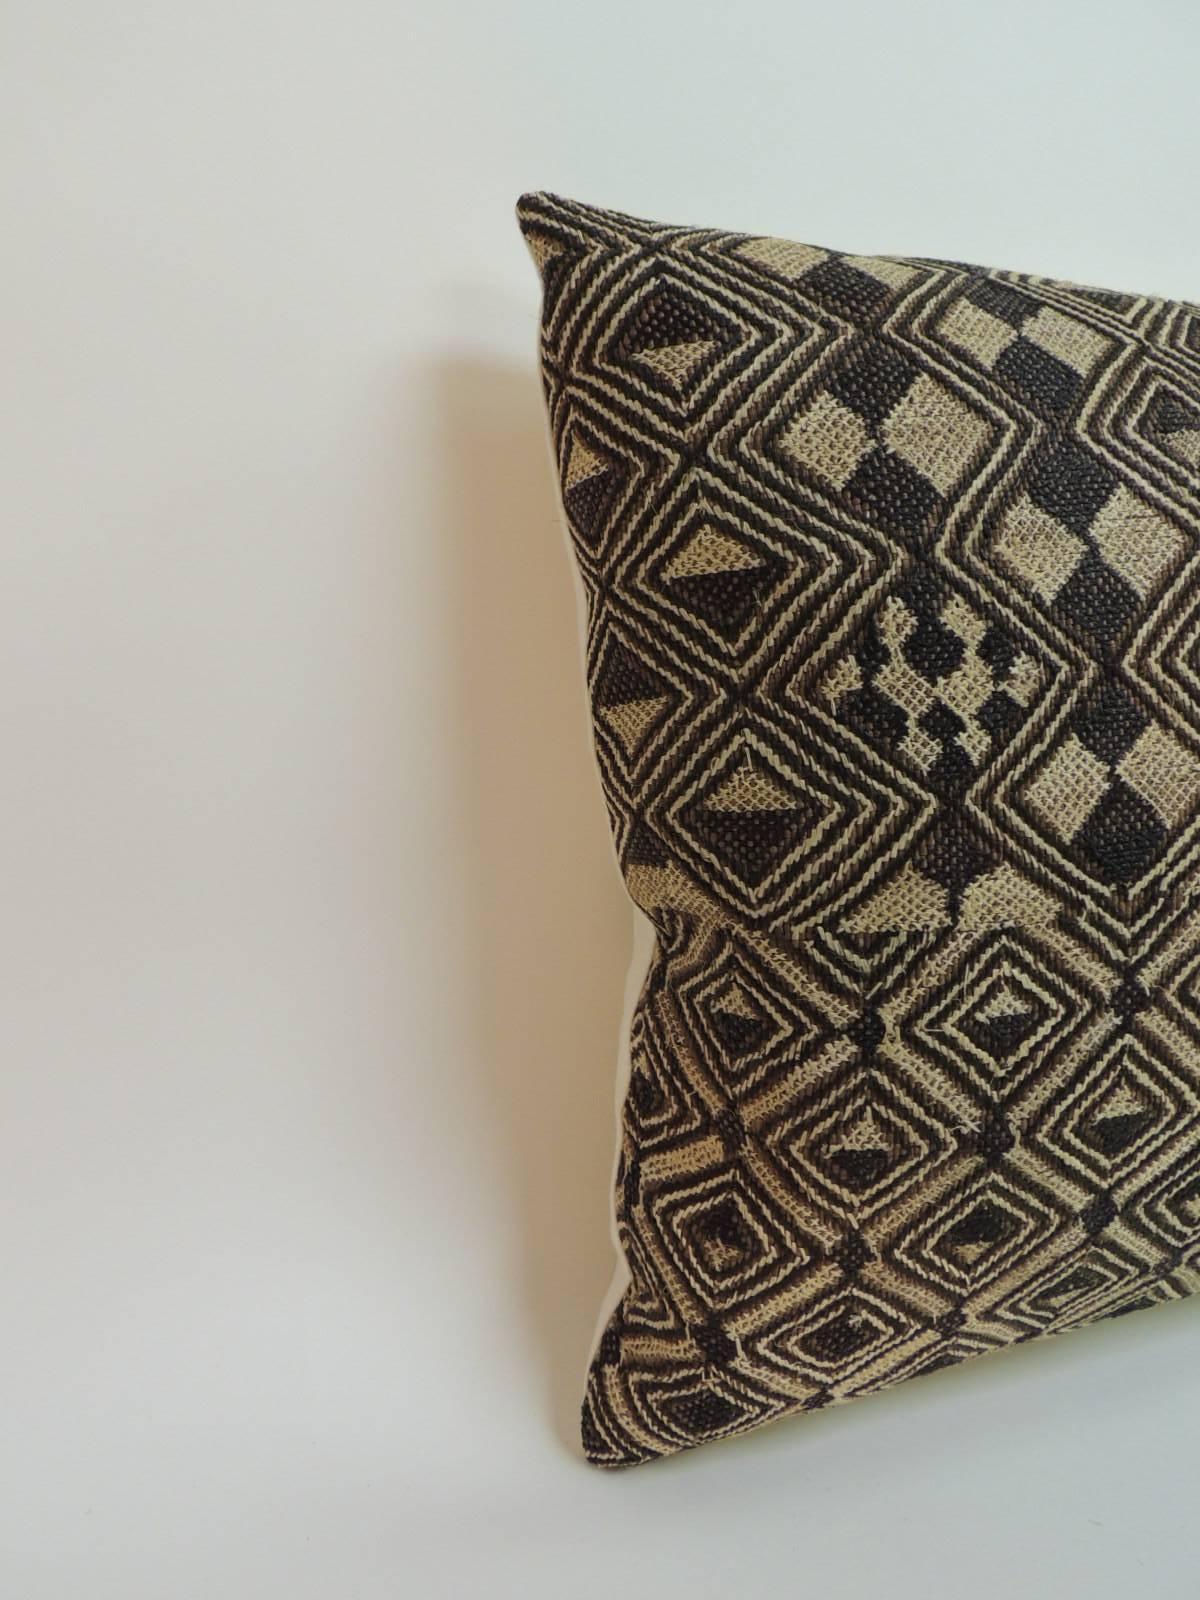 Tribal woven and embroidery African decorative lumbar pillow. Over all square woven design in straw cloth/raffia to create this unique design. In shades of tan, camel and light brown. Natural linen backing. Decorative pillow designed and handcrafted